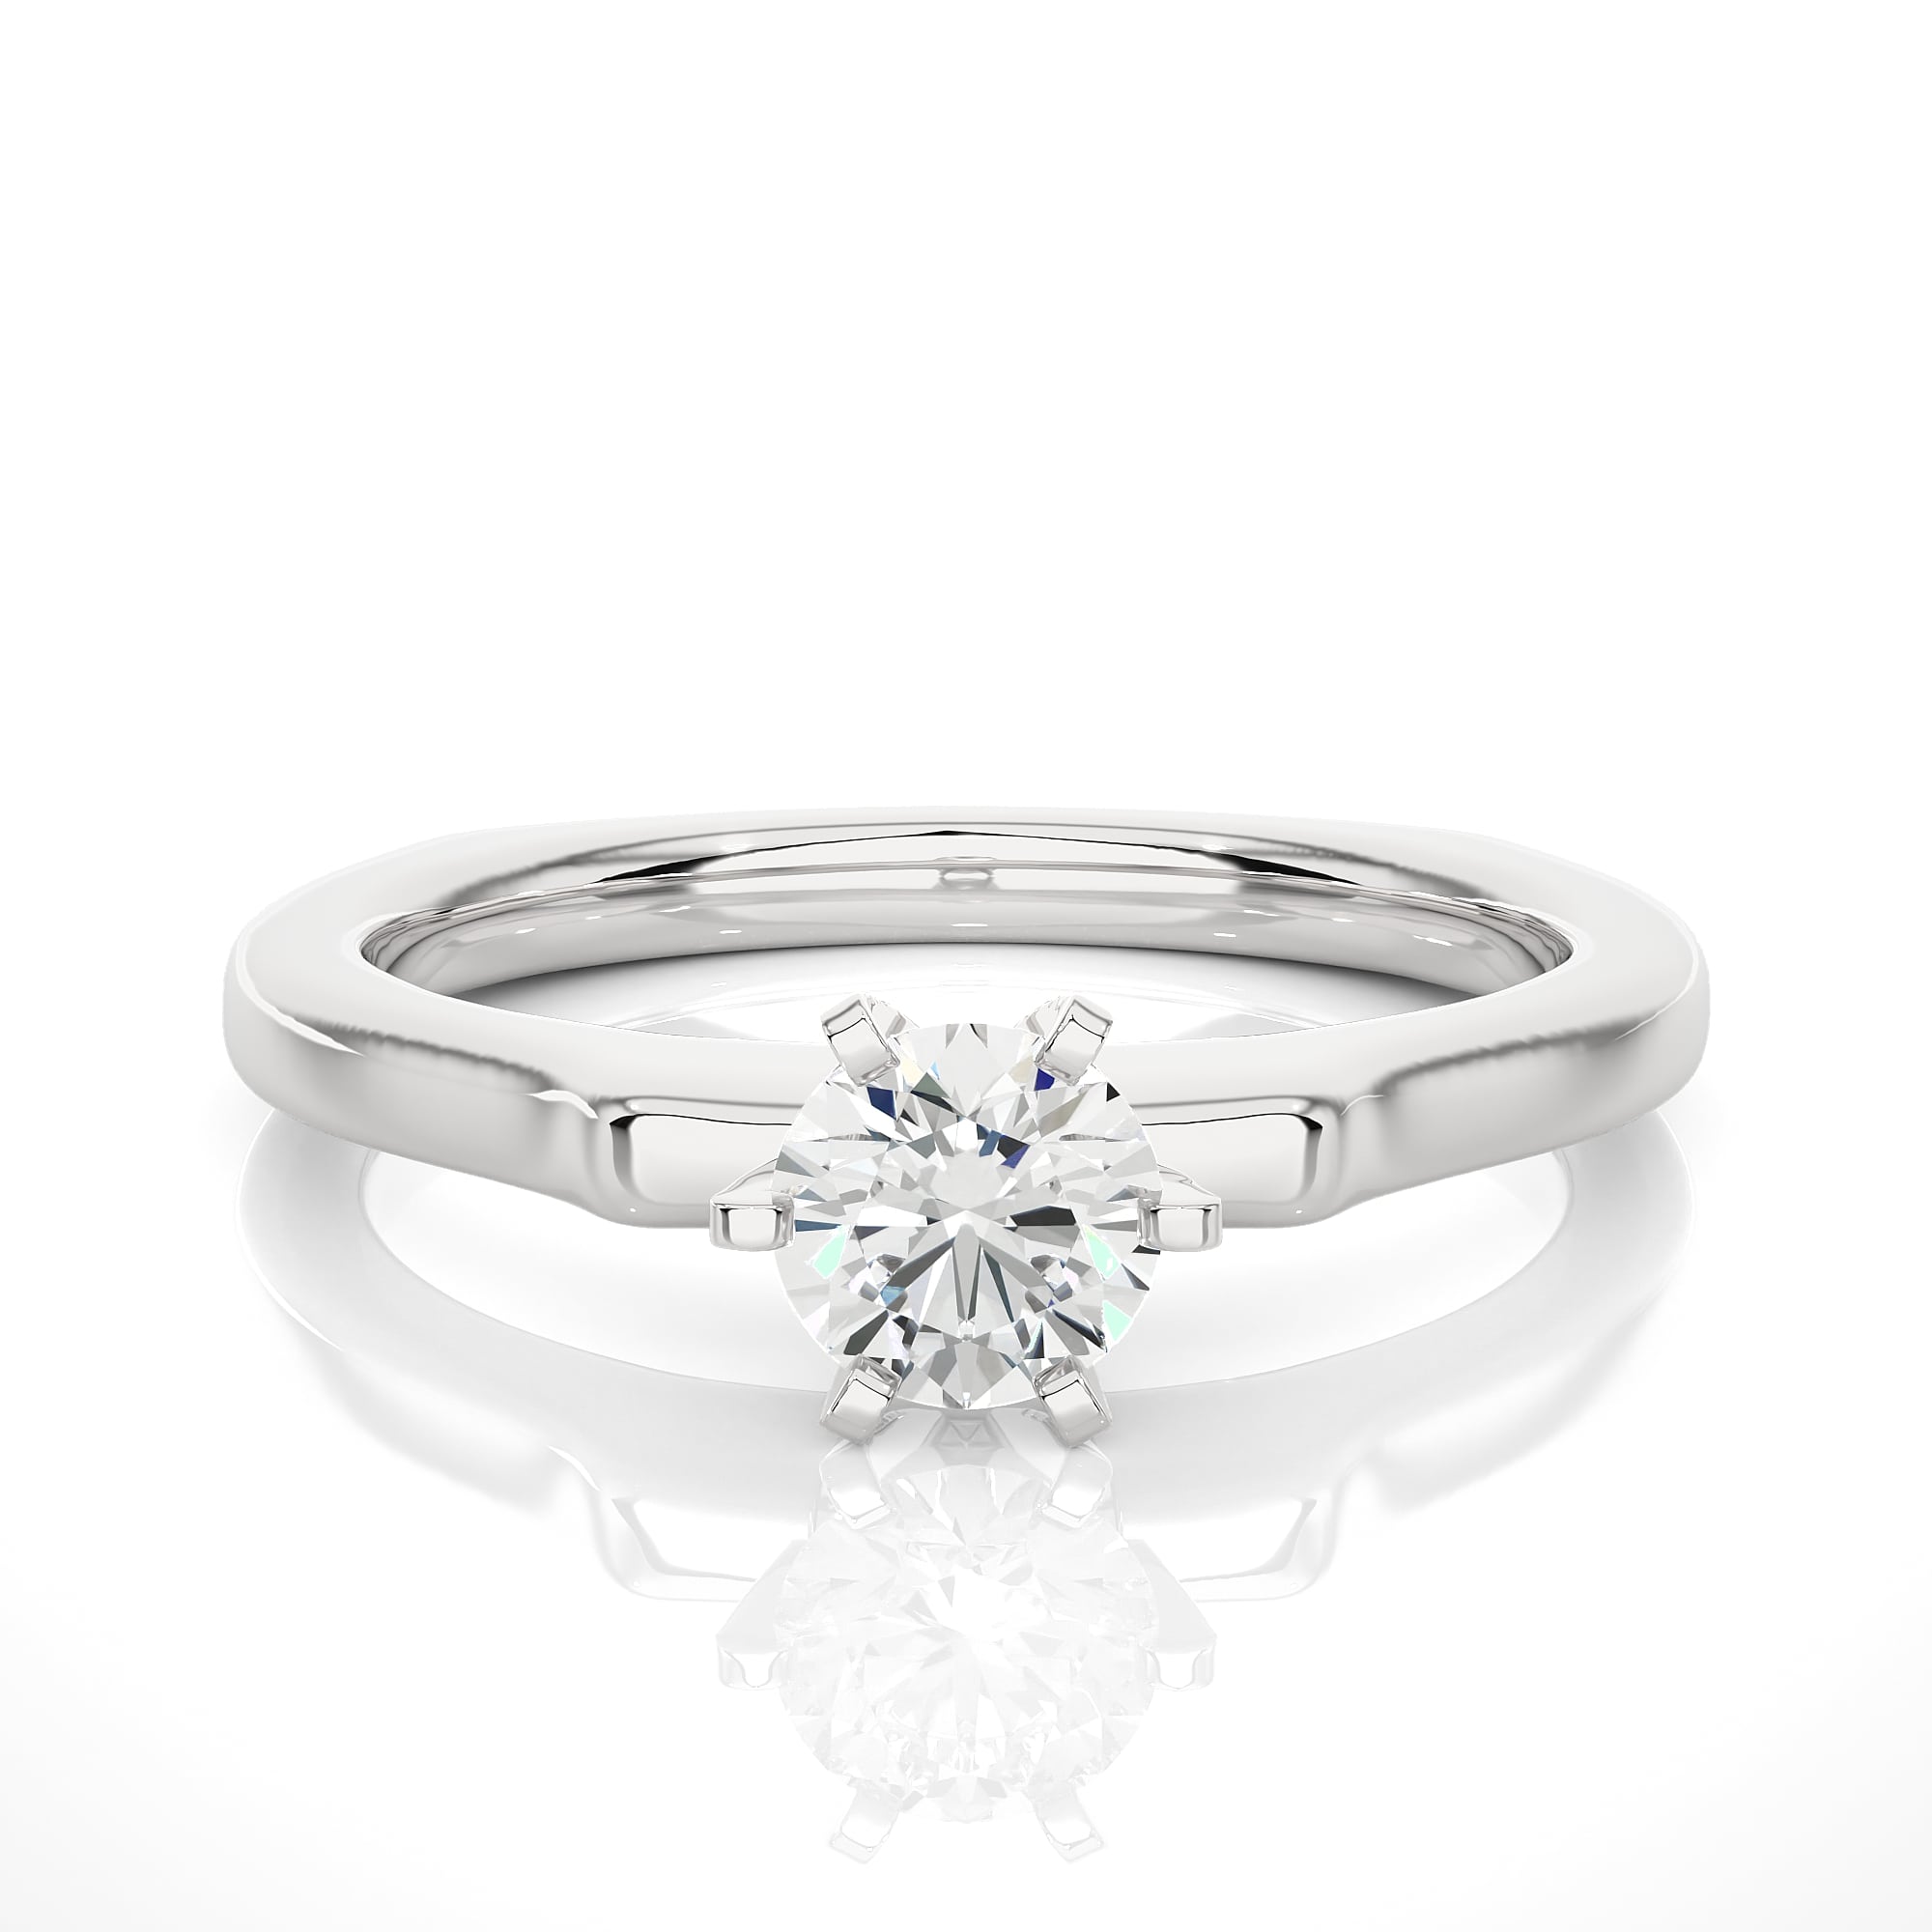 Fancy Solitaire Ring WG